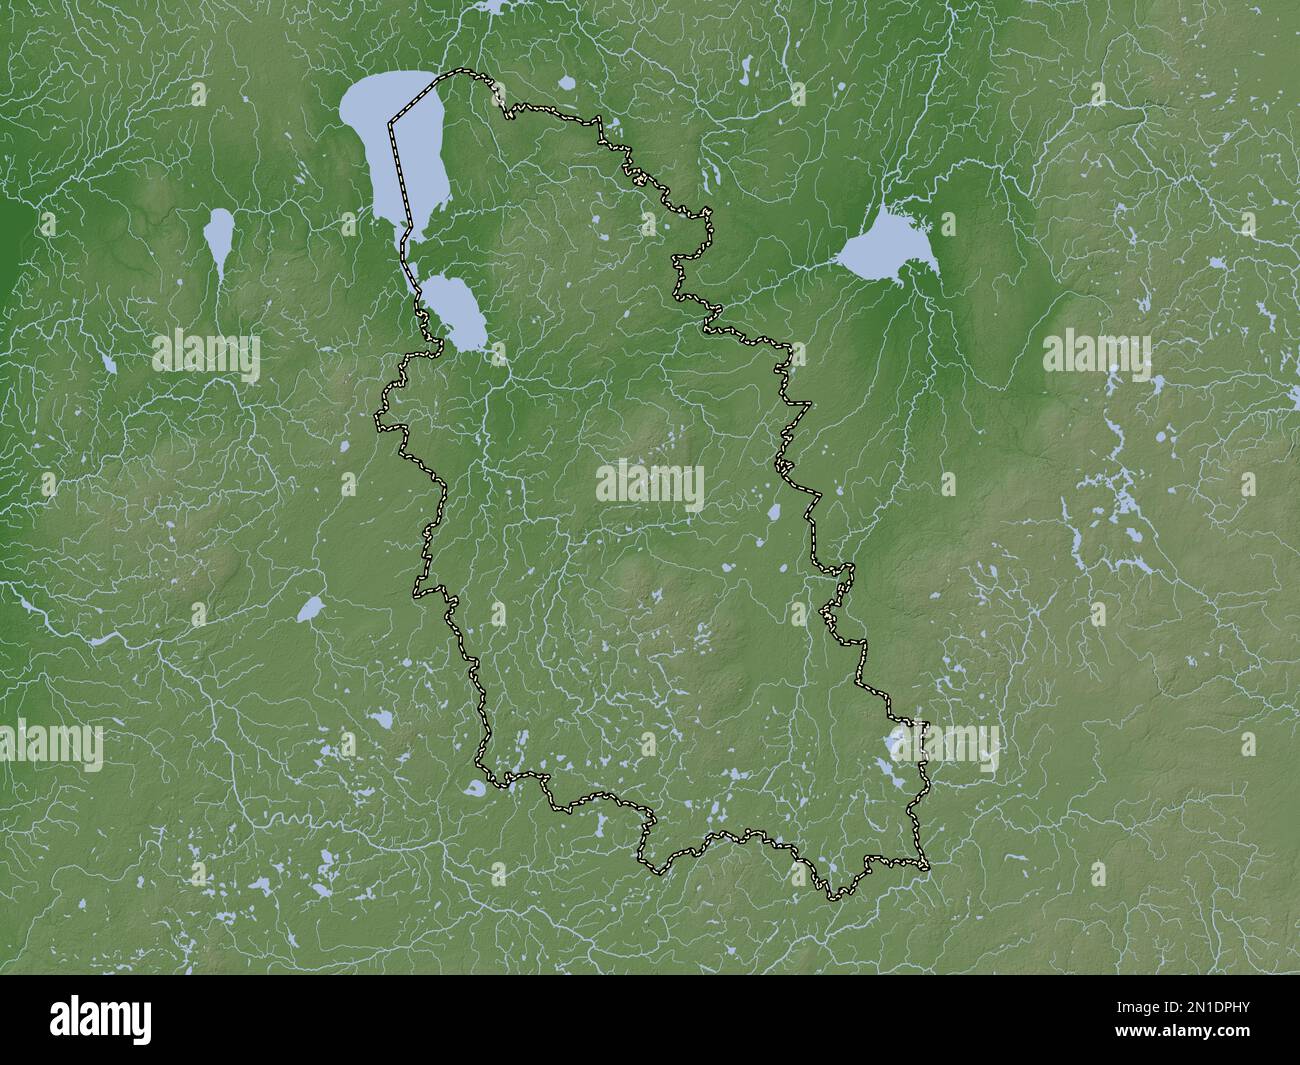 Pskov, region of Russia. Elevation map colored in wiki style with lakes and rivers Stock Photo